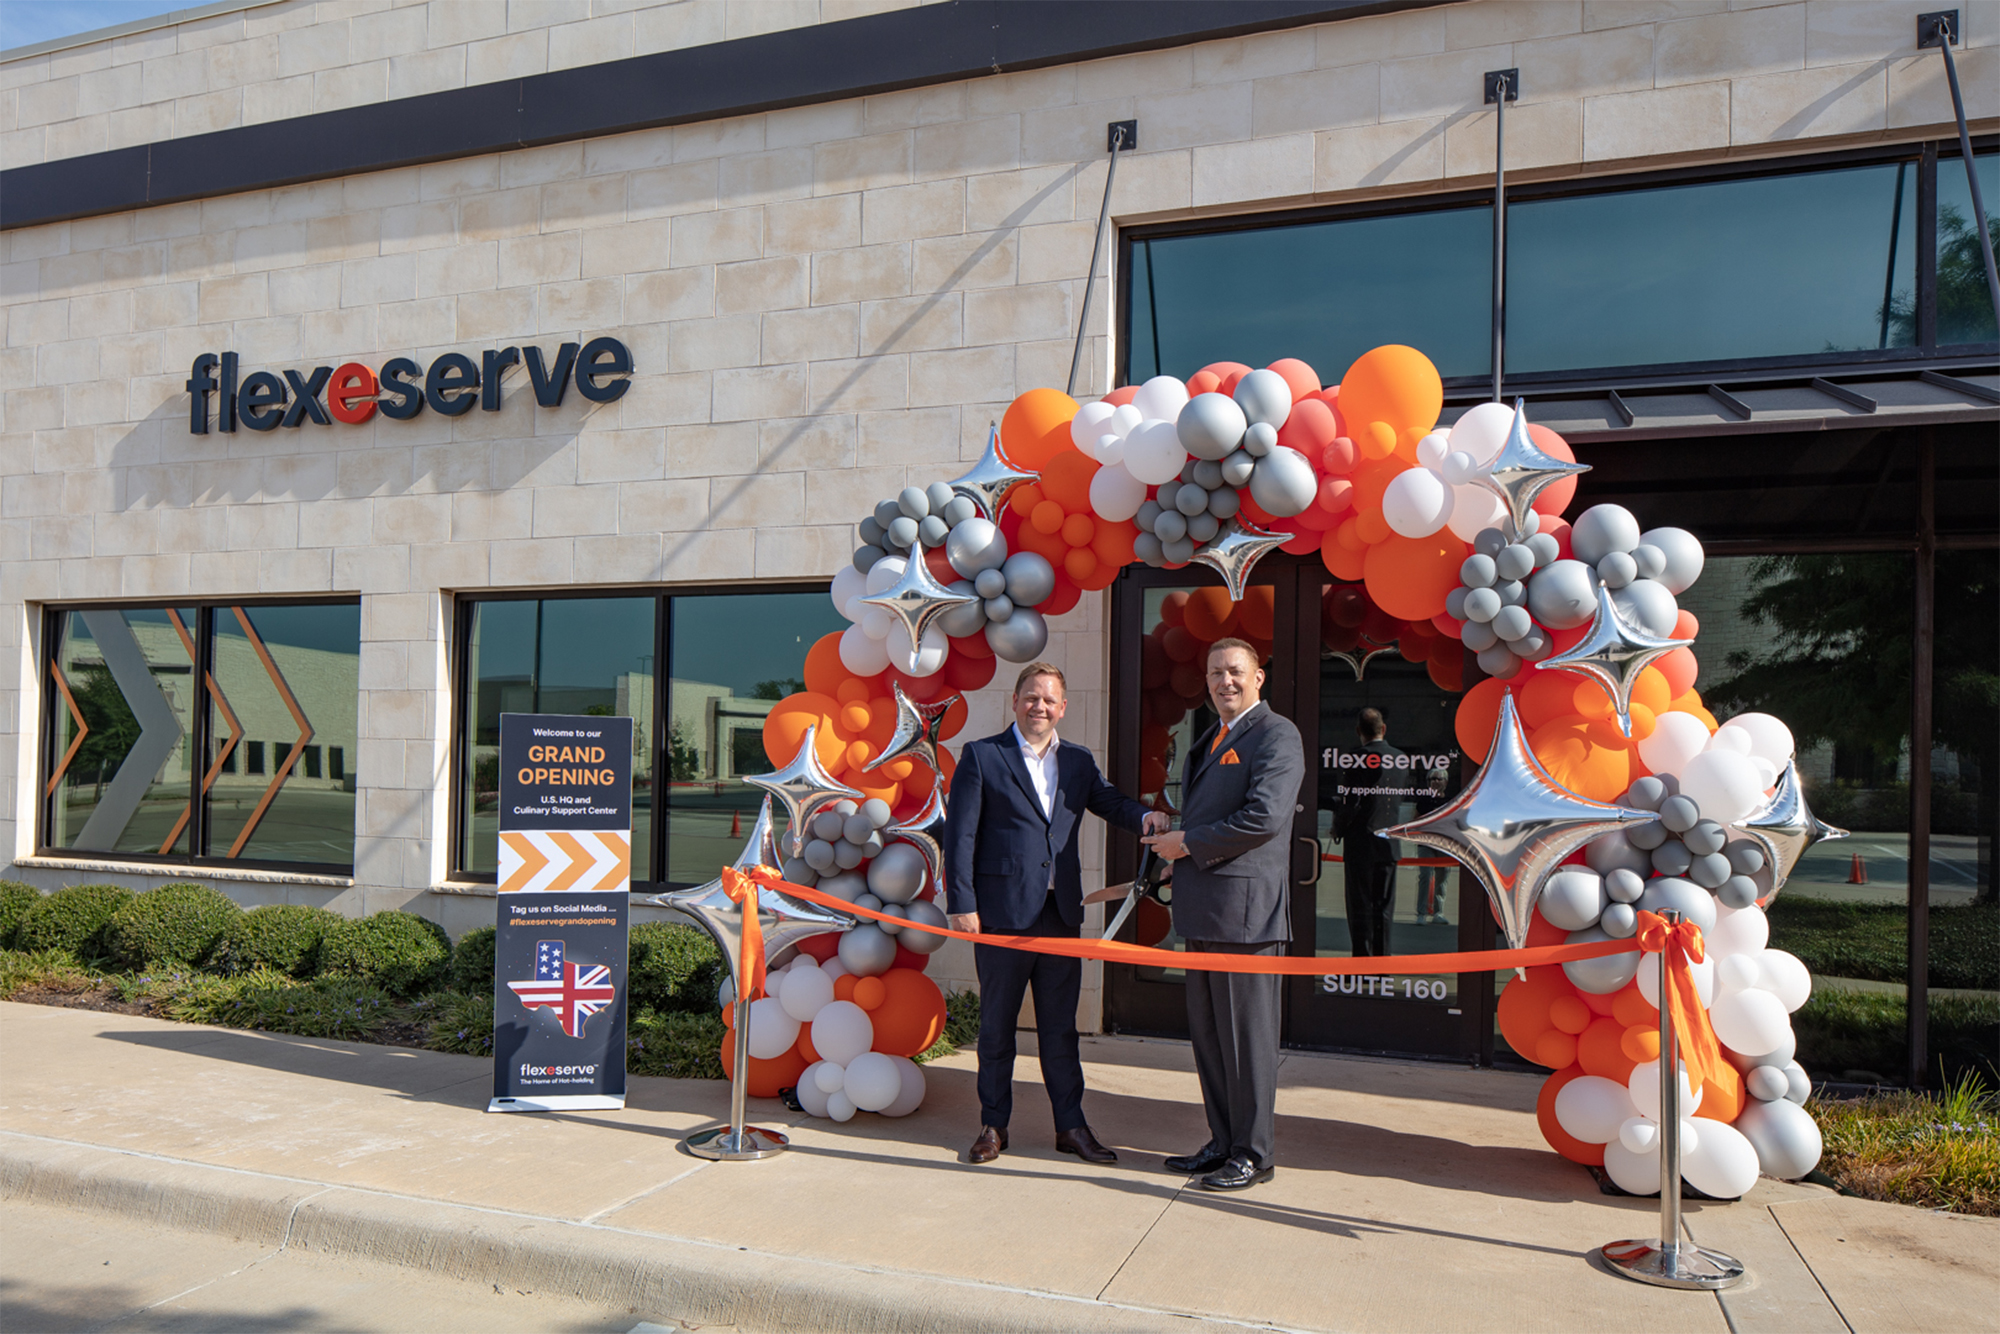 The Flexeserve Inc. Grand Opening saw Global CEO, Jamie Joyce and President of Flexeserve Inc., Dave Hinton officially launch the Southlake facility